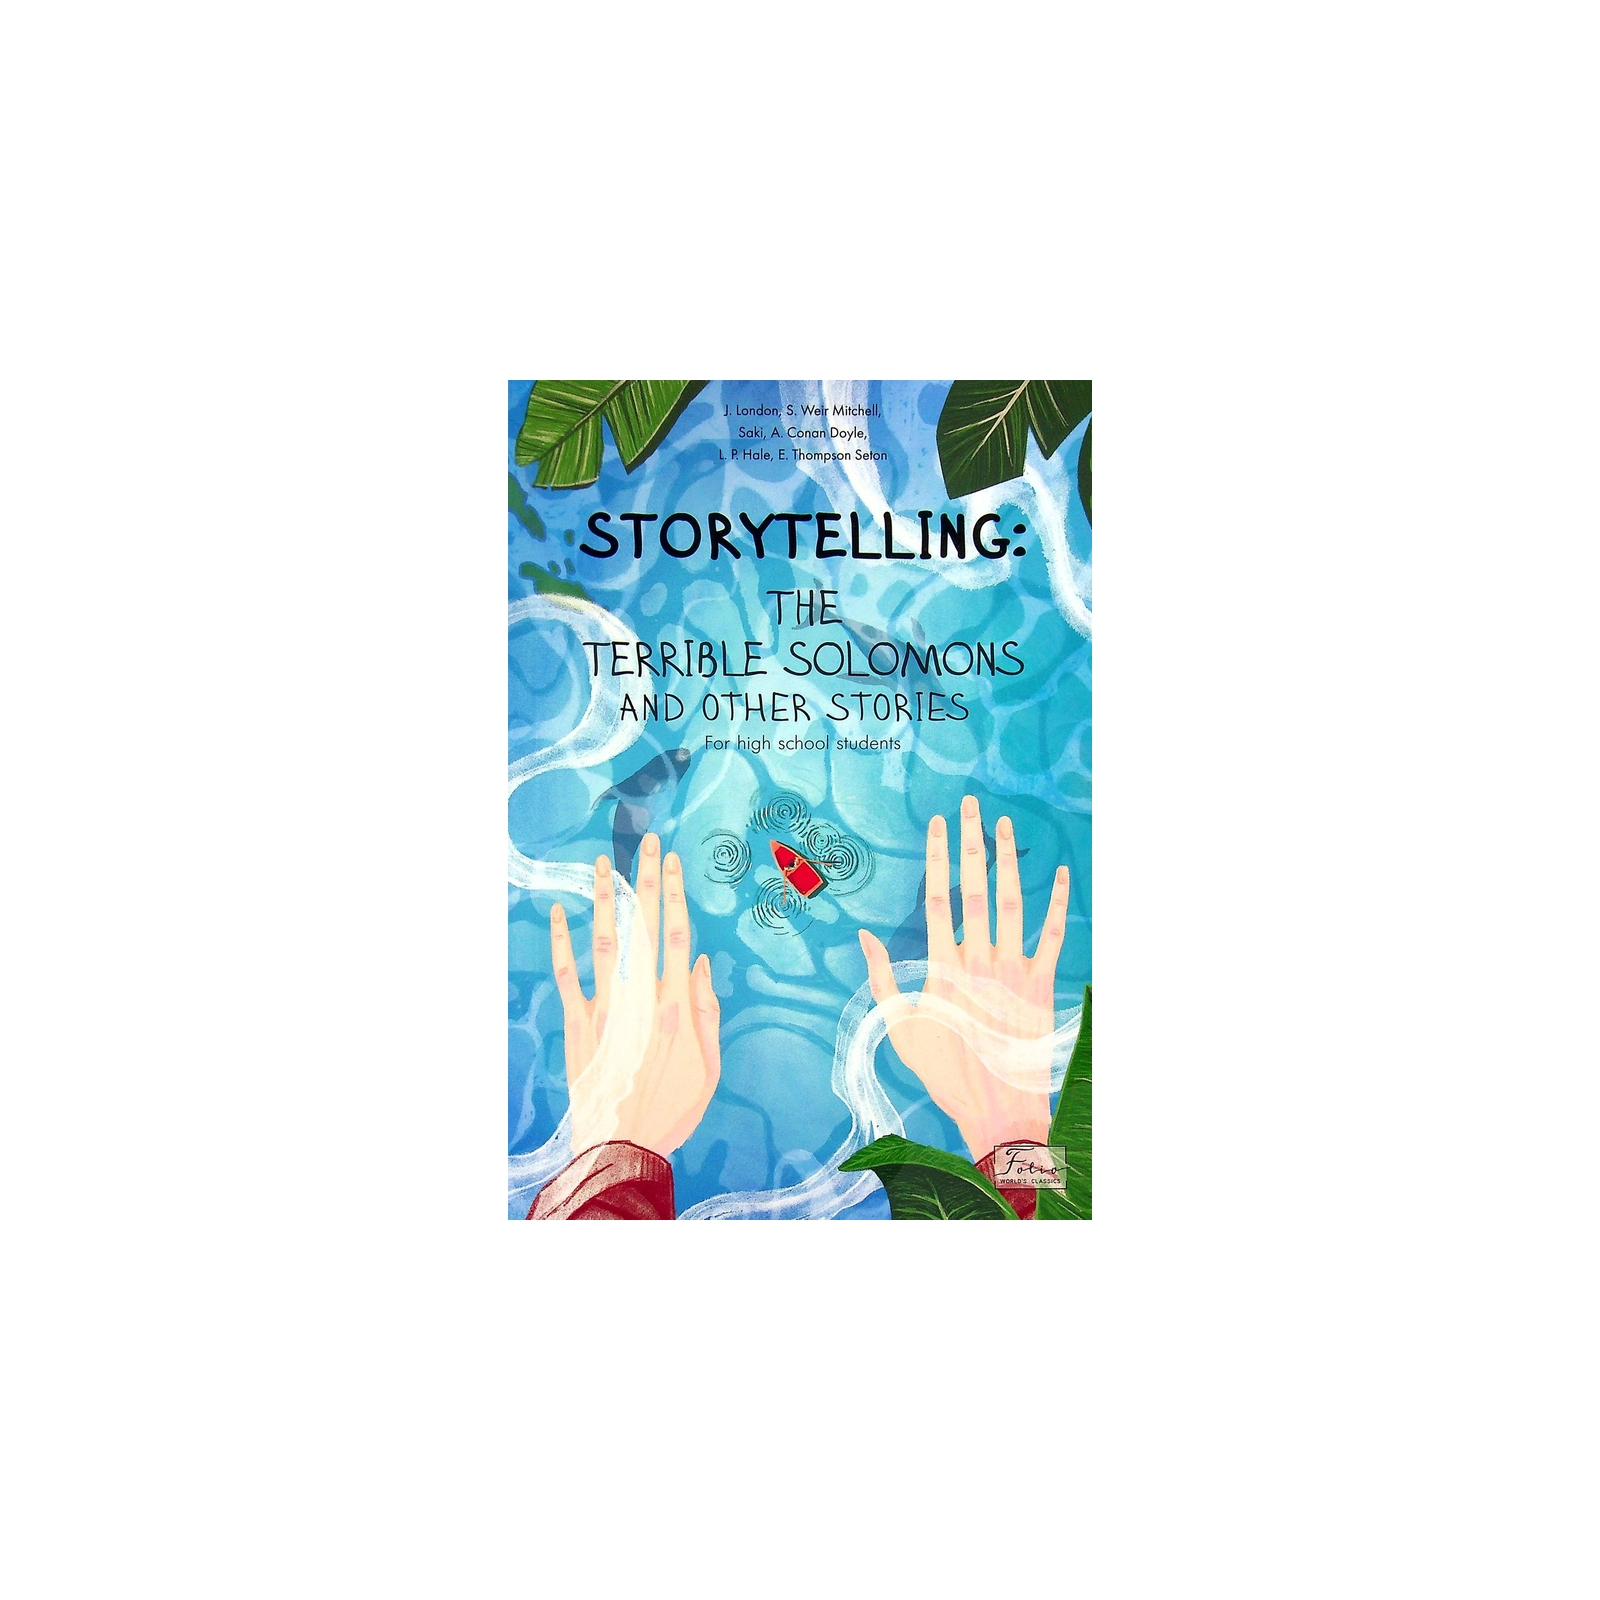 Книга Storytelling. The Terrible Solomons and Other Stories (for high school students) Фоліо (9789660397200)